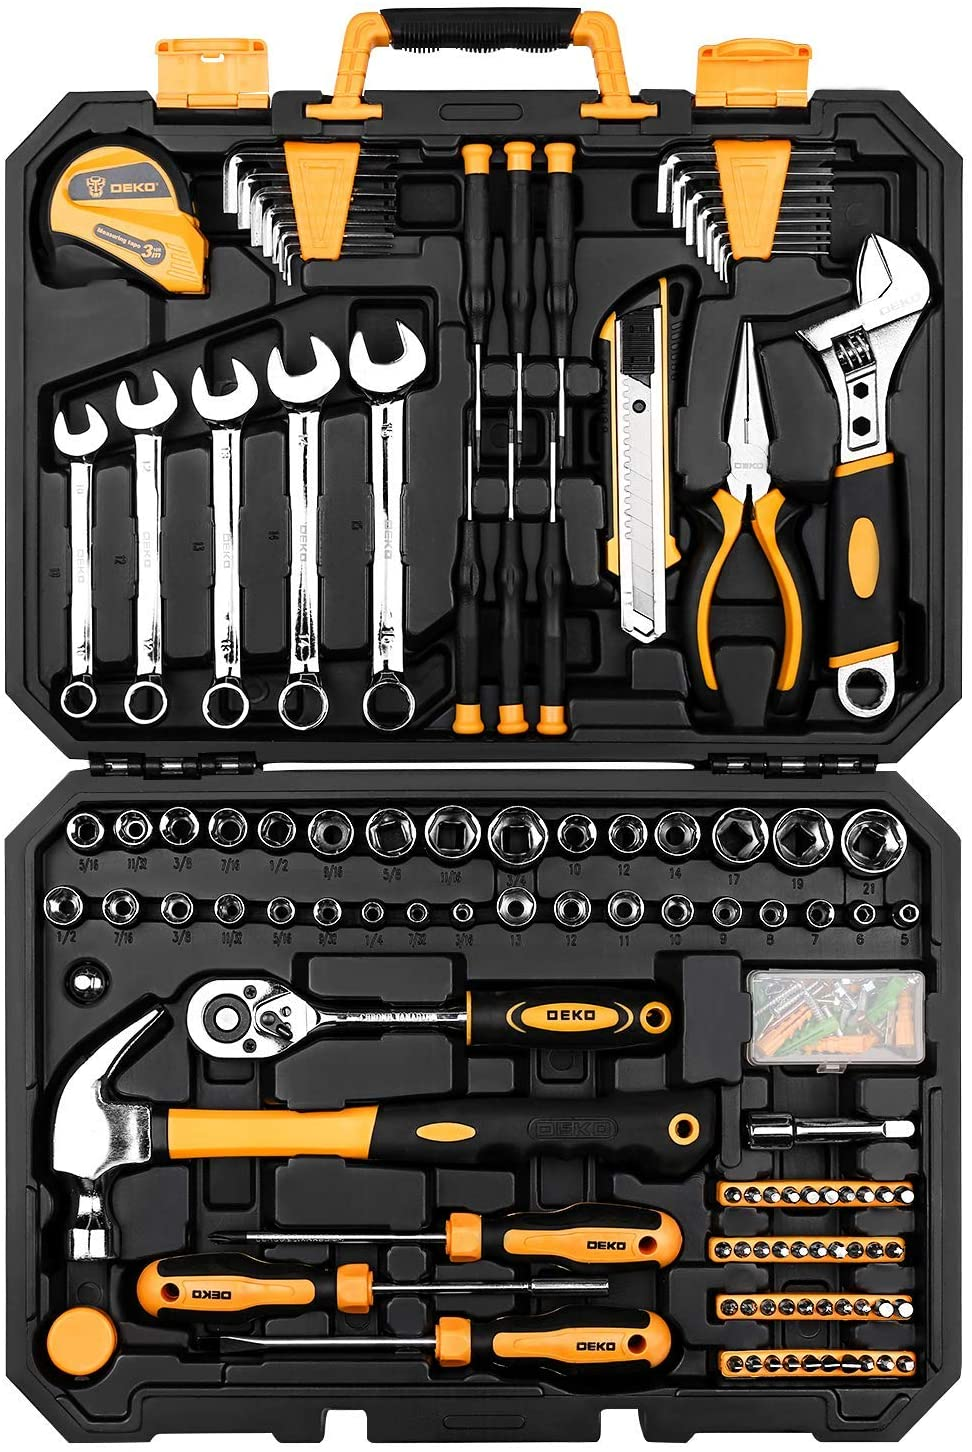 158 Piece Tool Set-General Household Hand Tool Kit,Auto Repair Tool Set, with Plastic Toolbox Storage Case